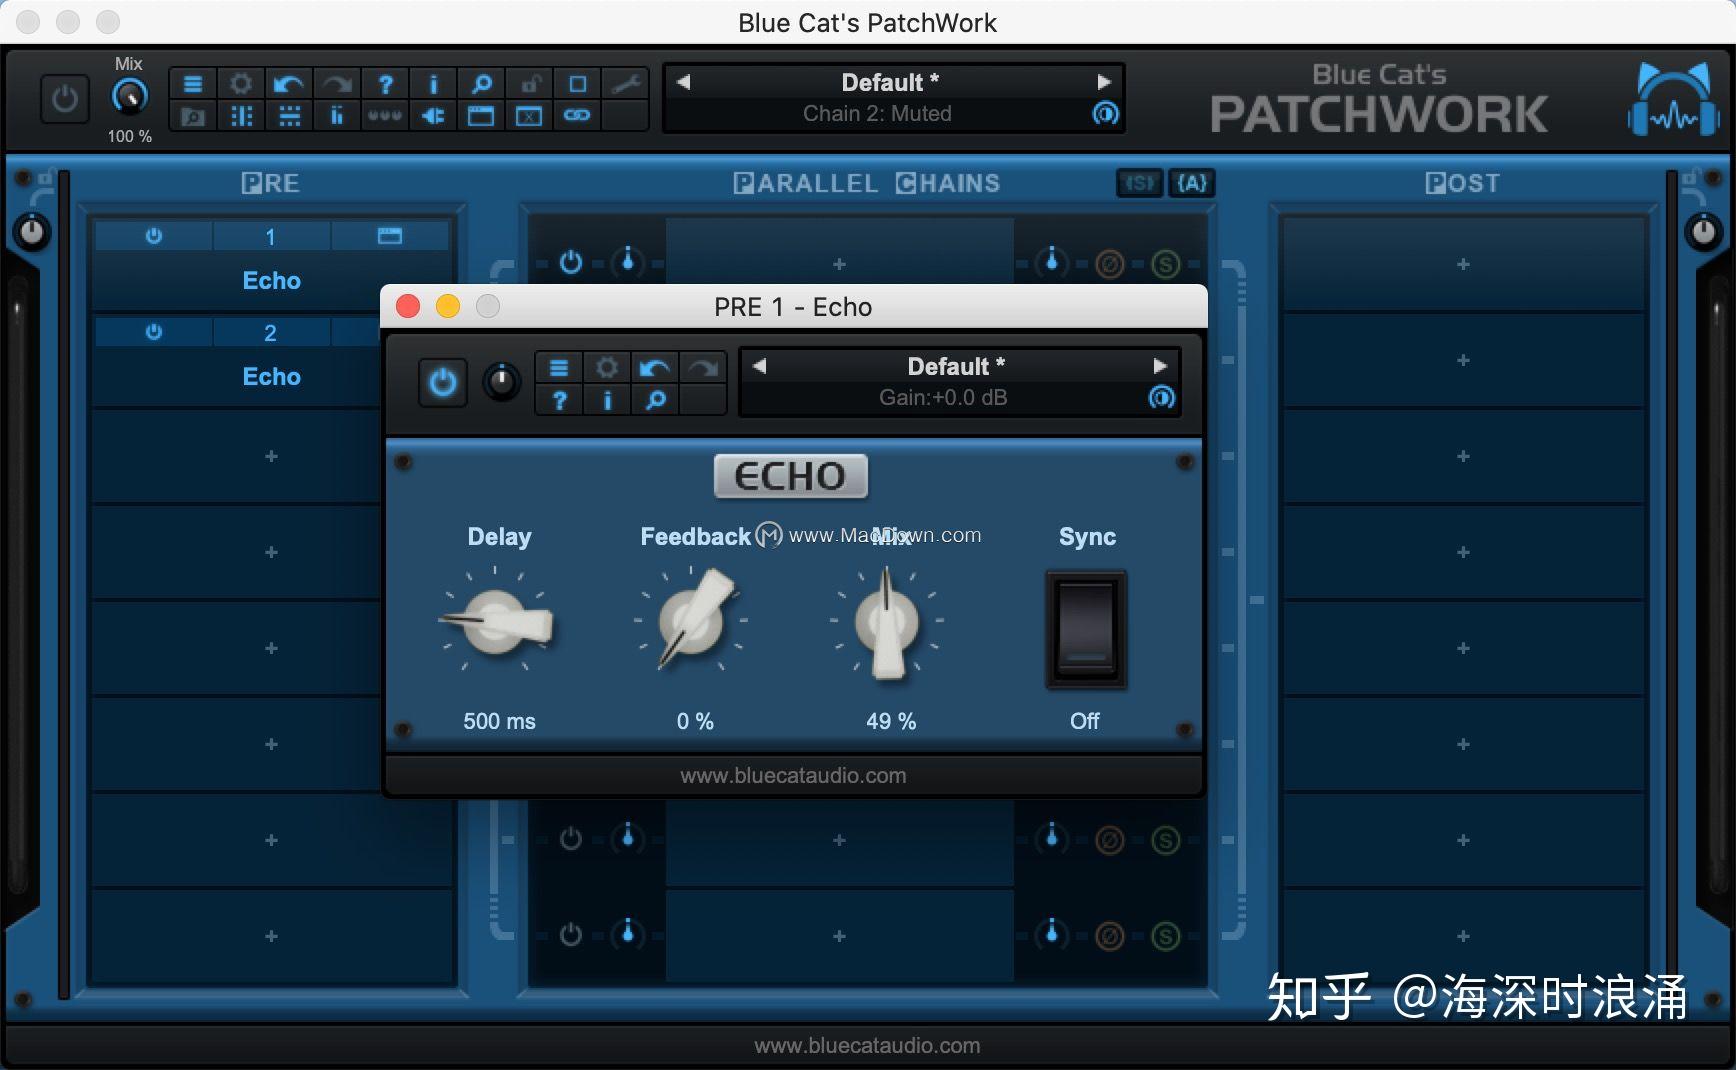 download the new Blue Cat PatchWork 2.66